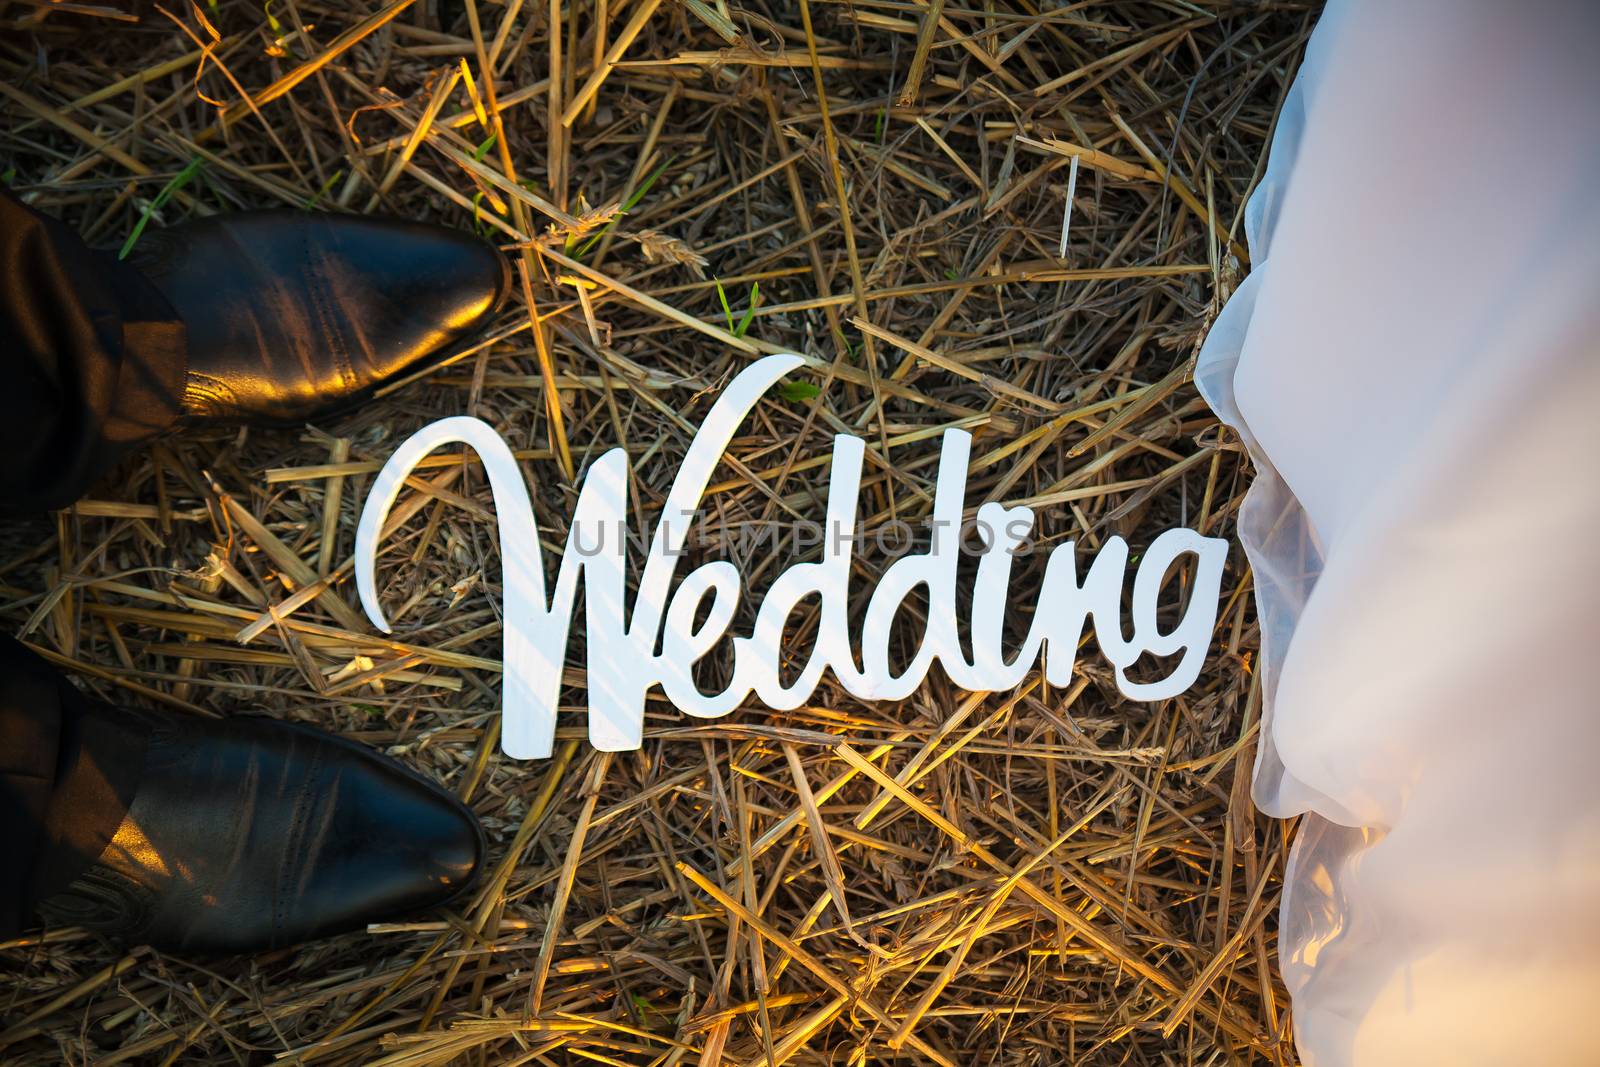 Feet of groom and bride and white wedding letters in straw